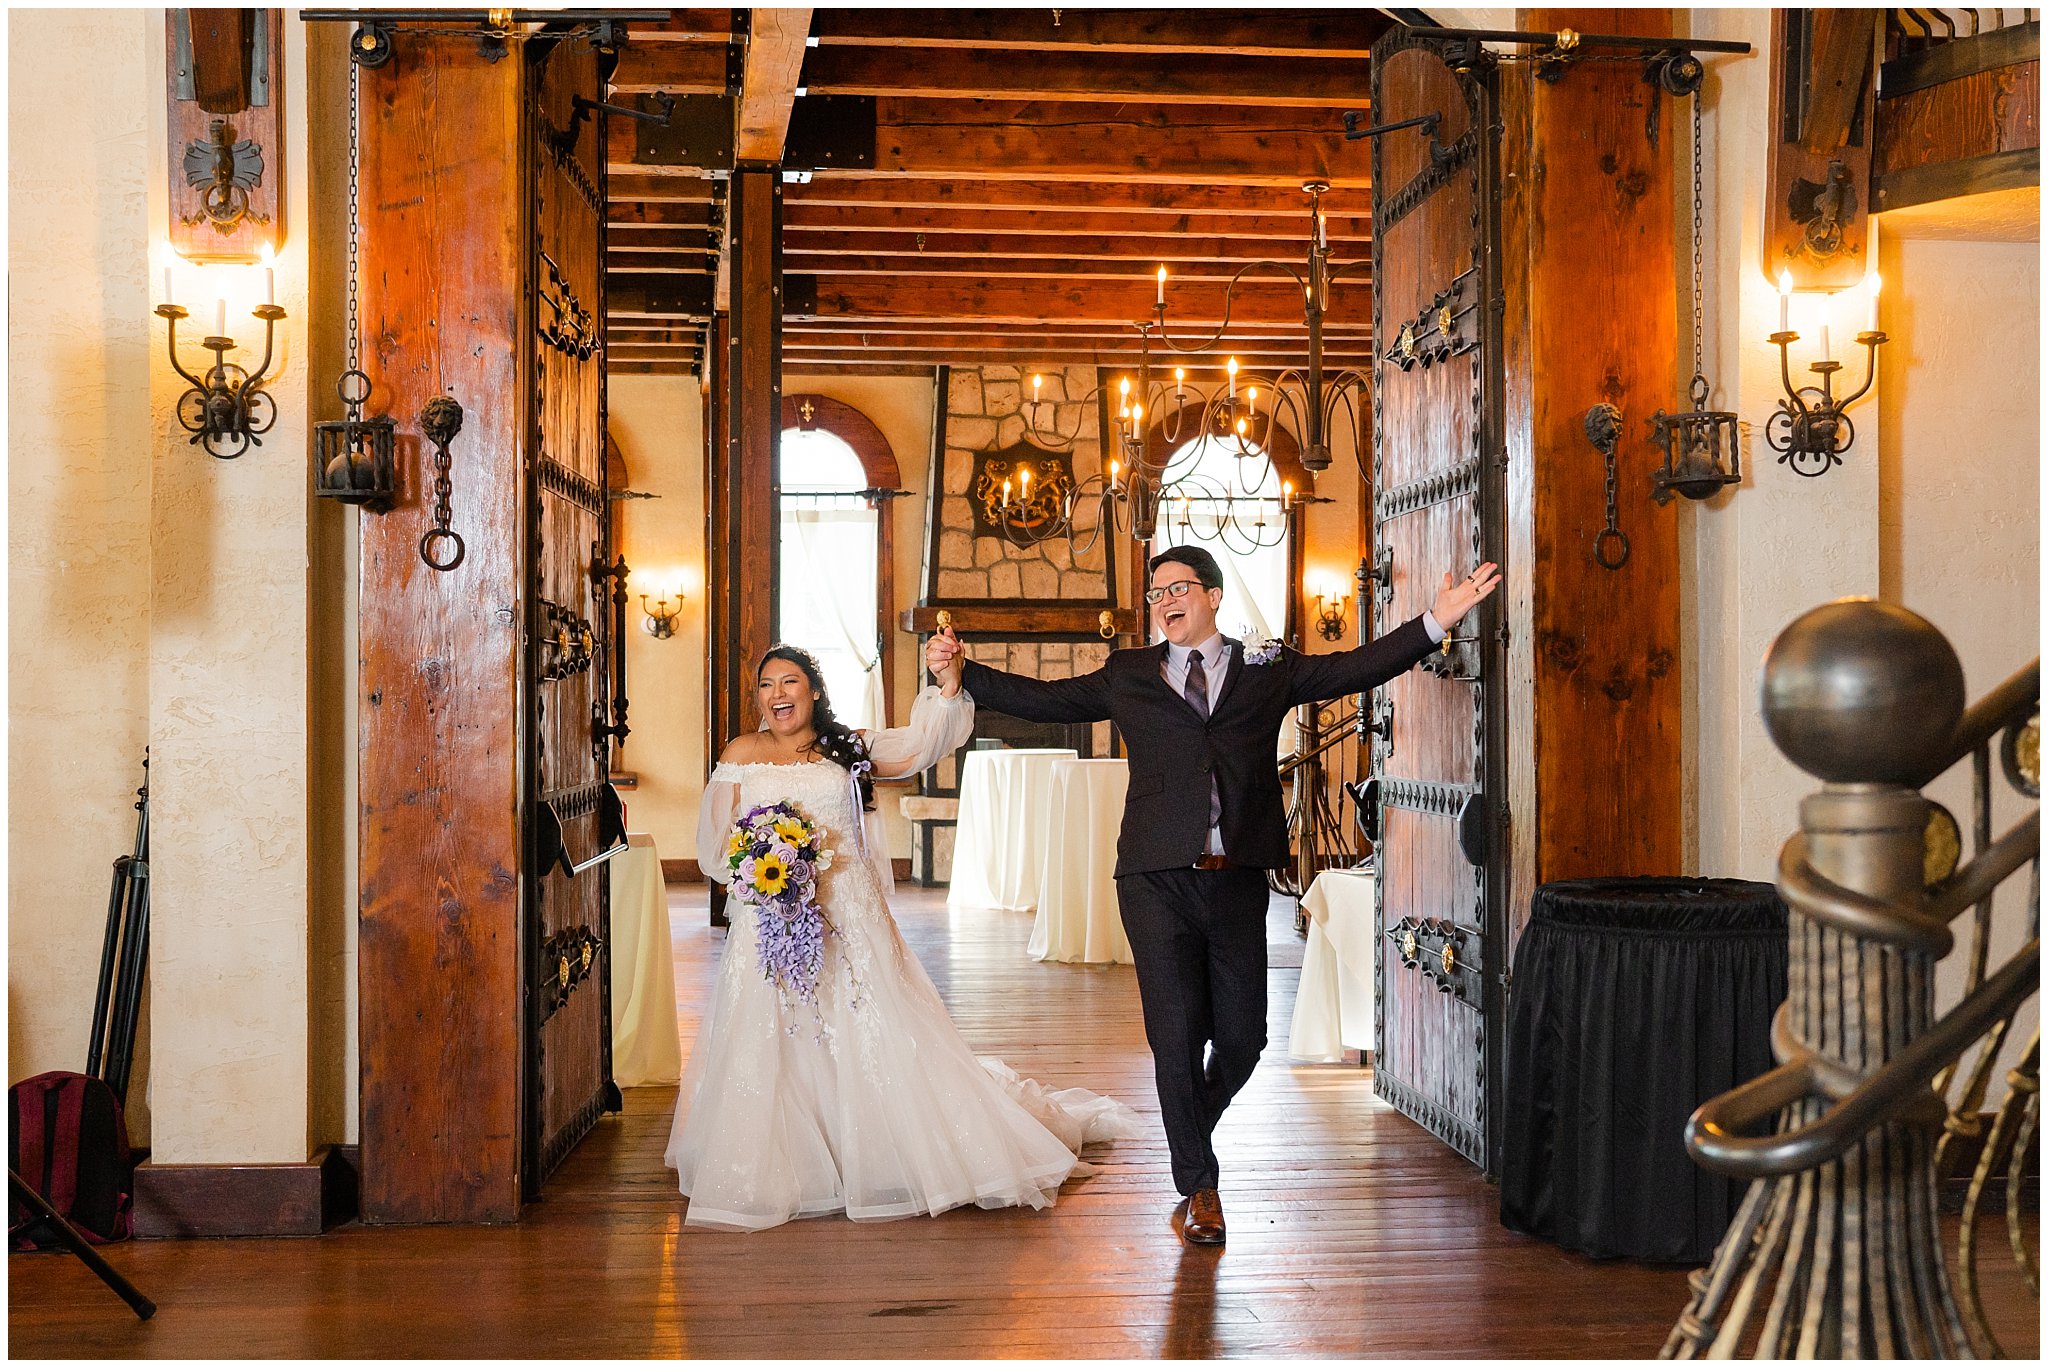 Grand entrance and toasts during dinner inside castle | Wadley Farms Spring Castle Wedding